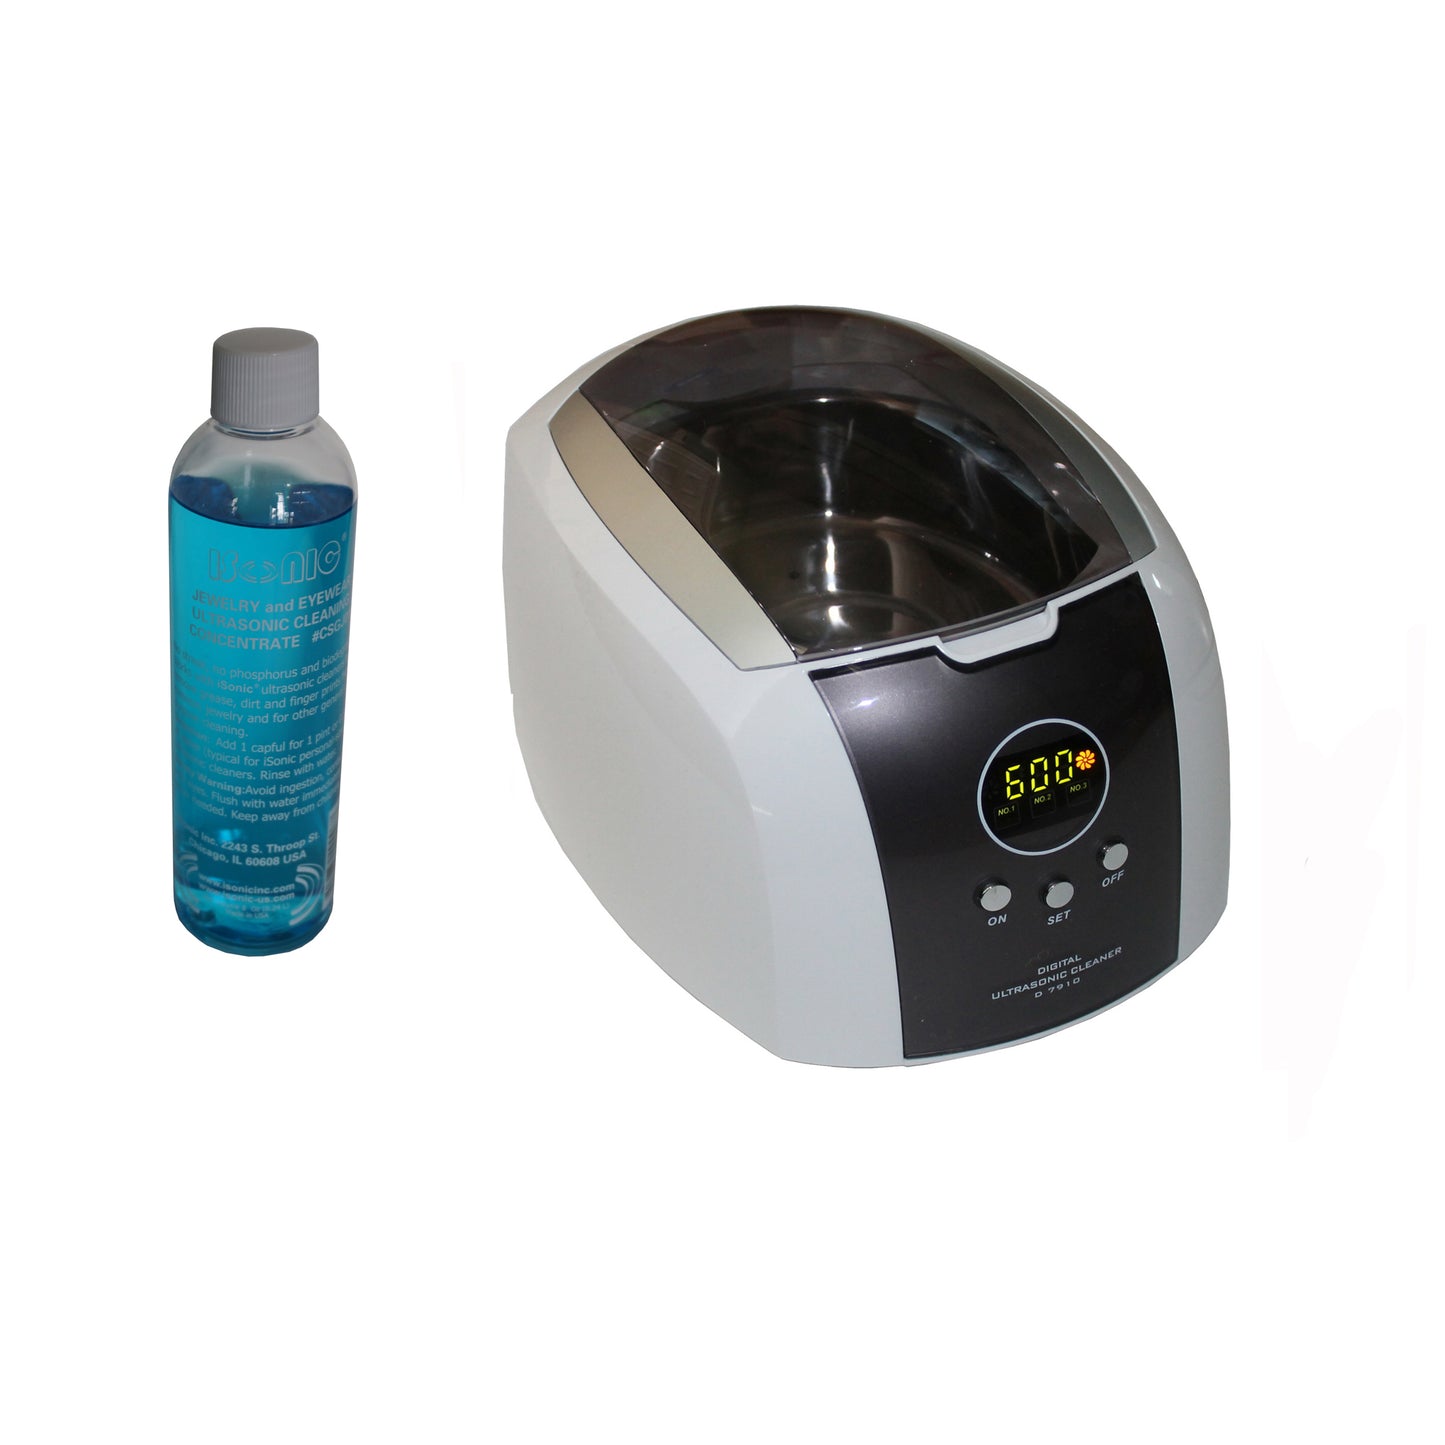 D7910B+CSGJ01 | iSonic® Digital Ultrasonic Cleaner, with Jewelry/Eyewear Cleaning Solution Concentrate CSGJ01, 8OZ, Promotional Price!